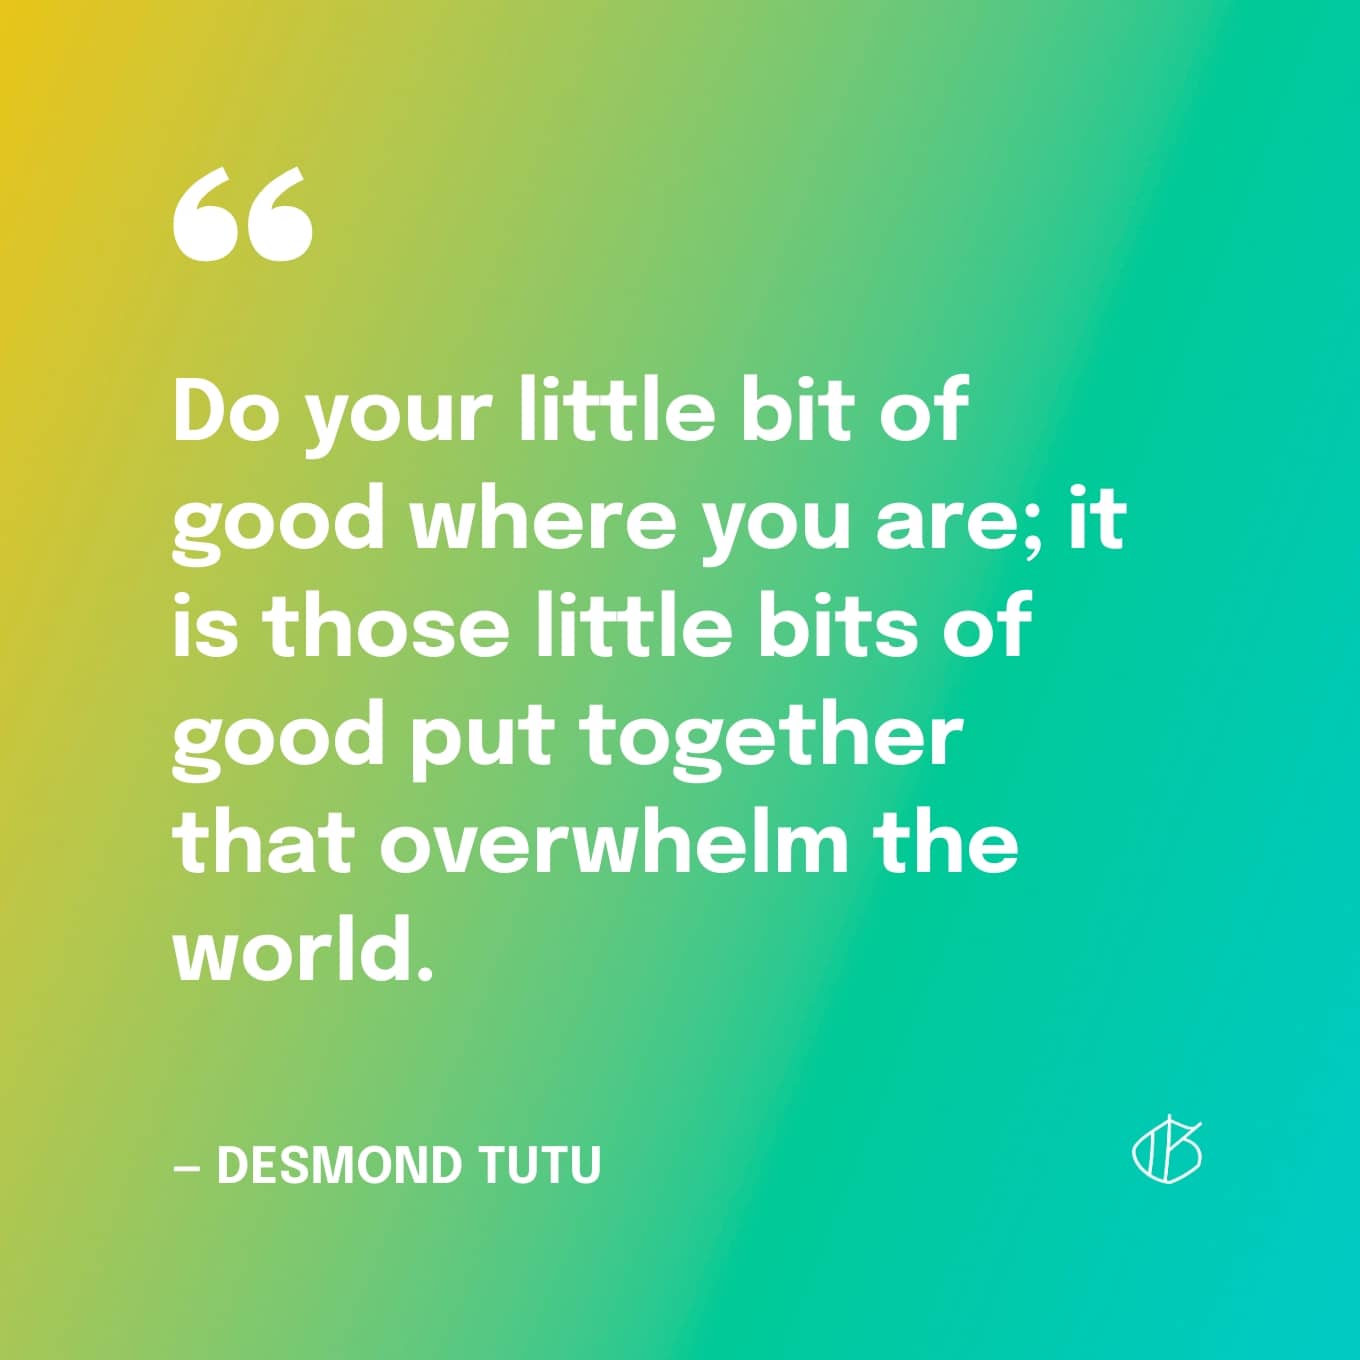 Quote: “Do your little bit of good where you are; it is those little bits of good put together that overwhelm the world.” — Desmond Tutu